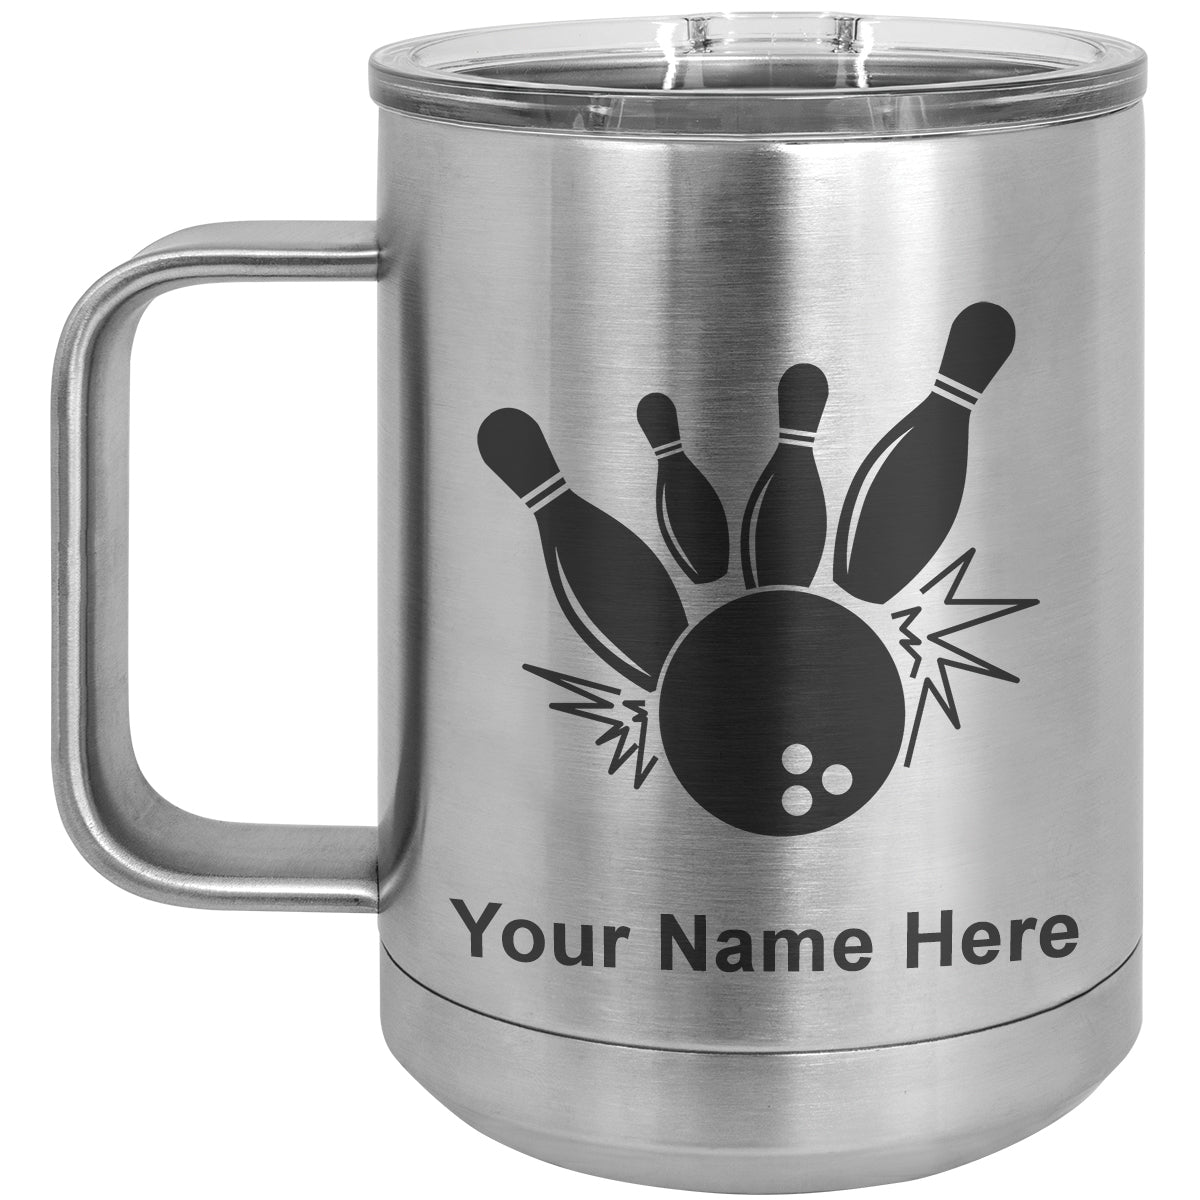 15oz Vacuum Insulated Coffee Mug, Bowling Ball and Pins, Personalized Engraving Included